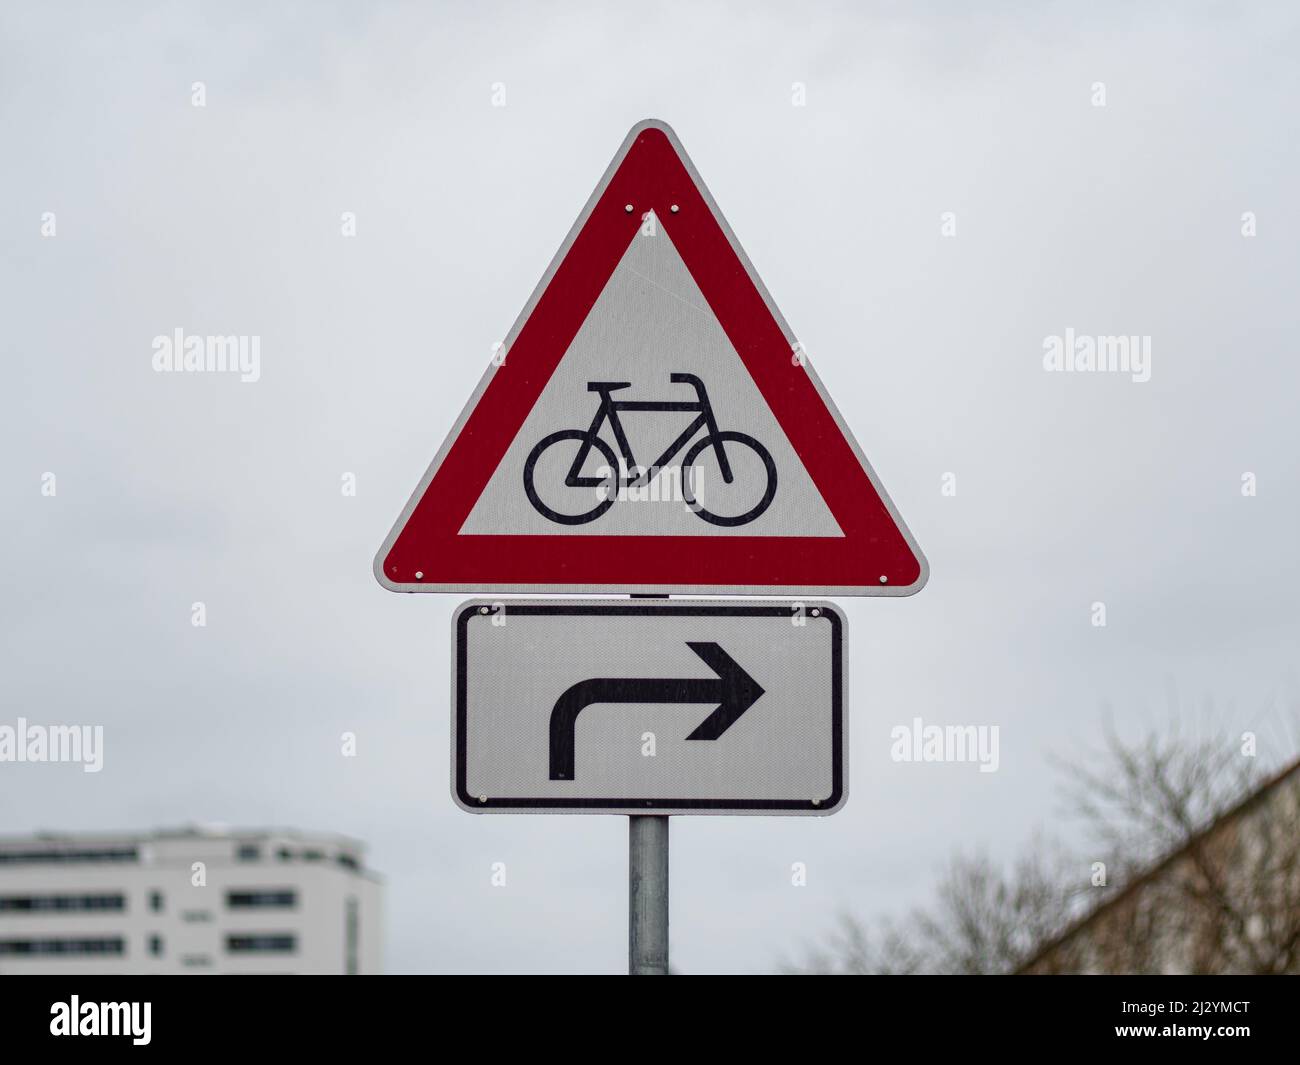 Cyclists warning street sign with an arrow to the right. Road sign to pay attention to bicycle riders in a city. Symbol in front of an overcast sky. Stock Photo